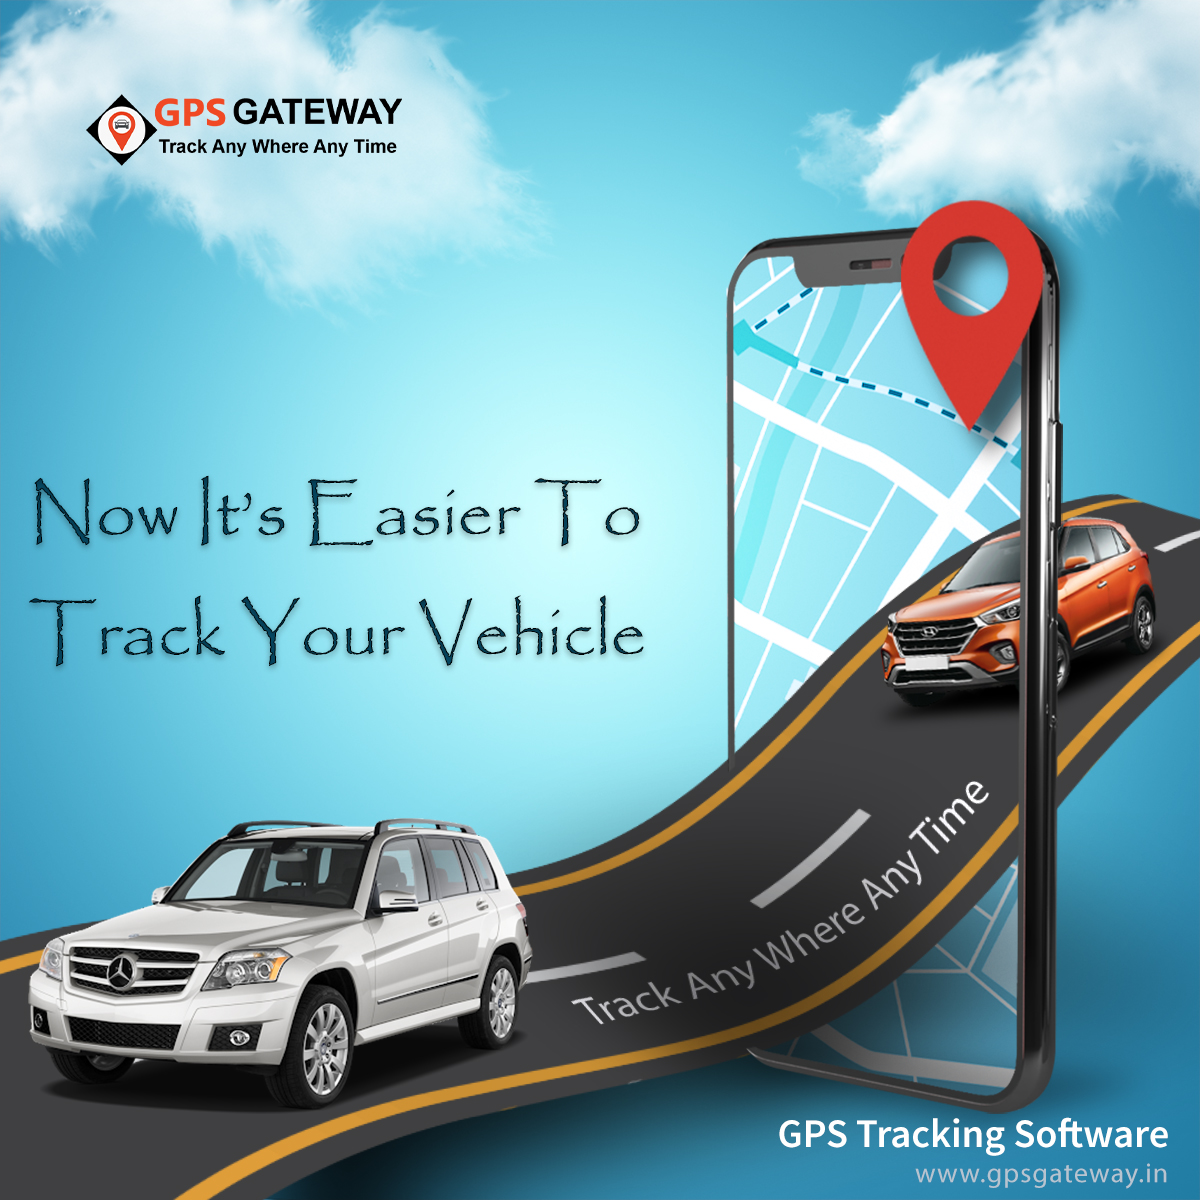 Tracking Apps, pharma mr location tracking, vechile gps tracker app, field force Tracking Apps